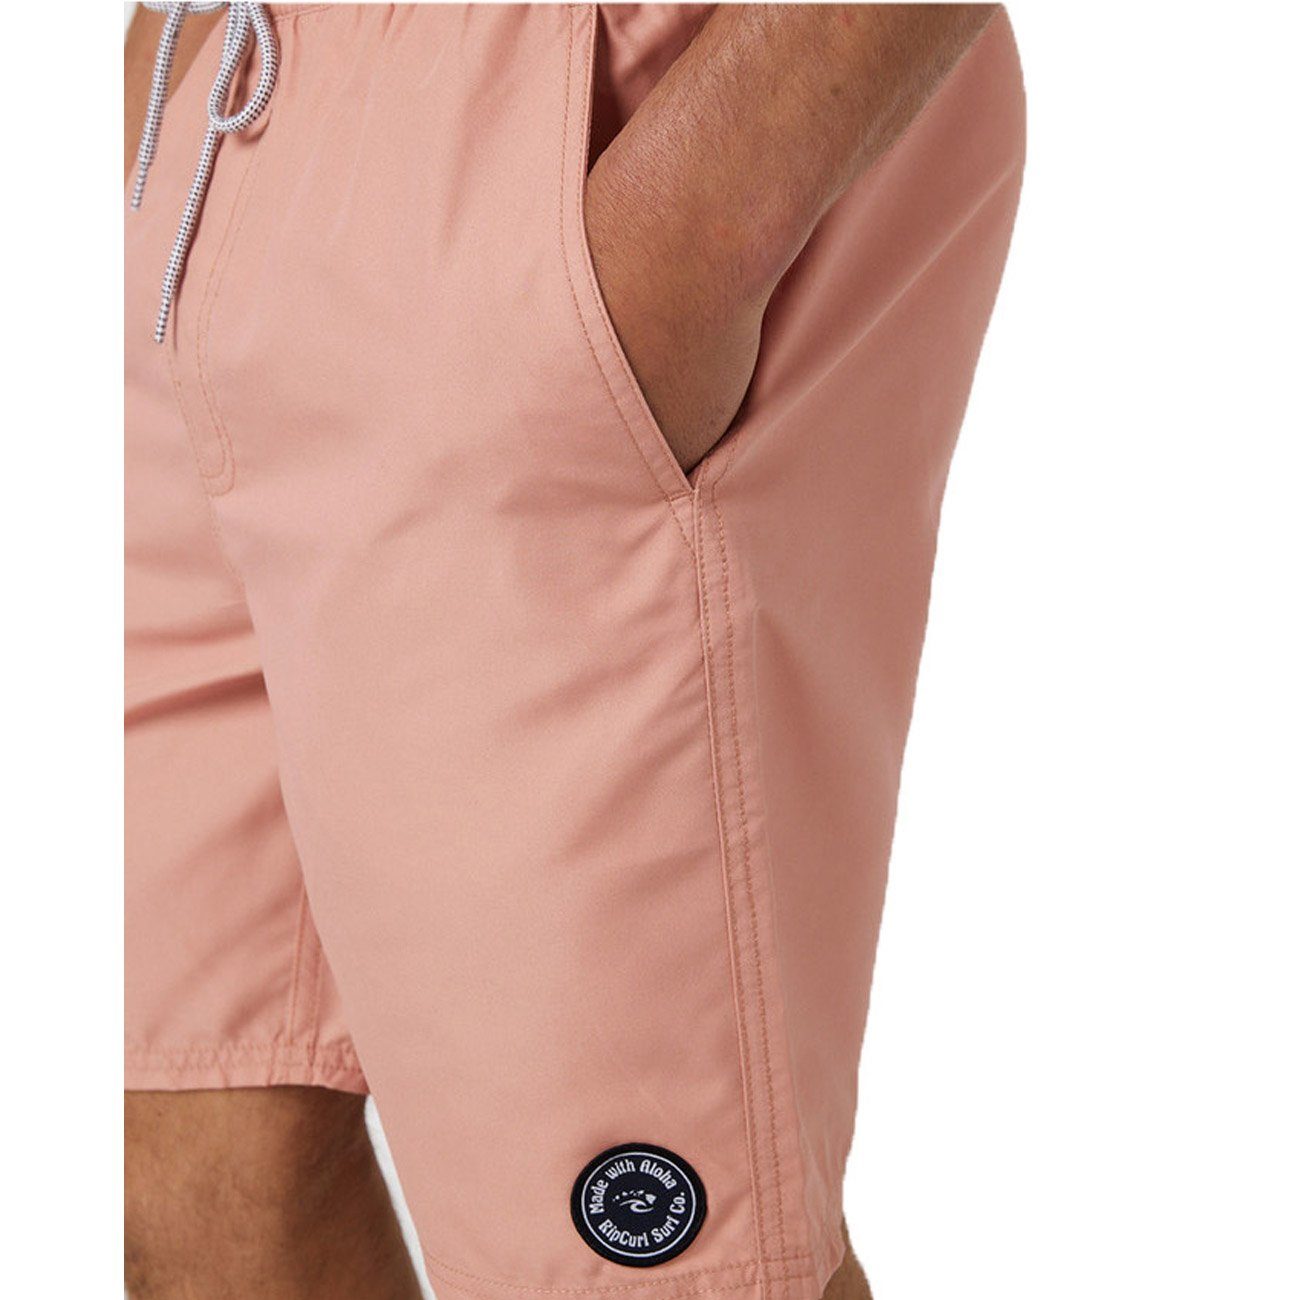 EASY Badeshorts VOLLEY LIVING dusty Rip Curl rose